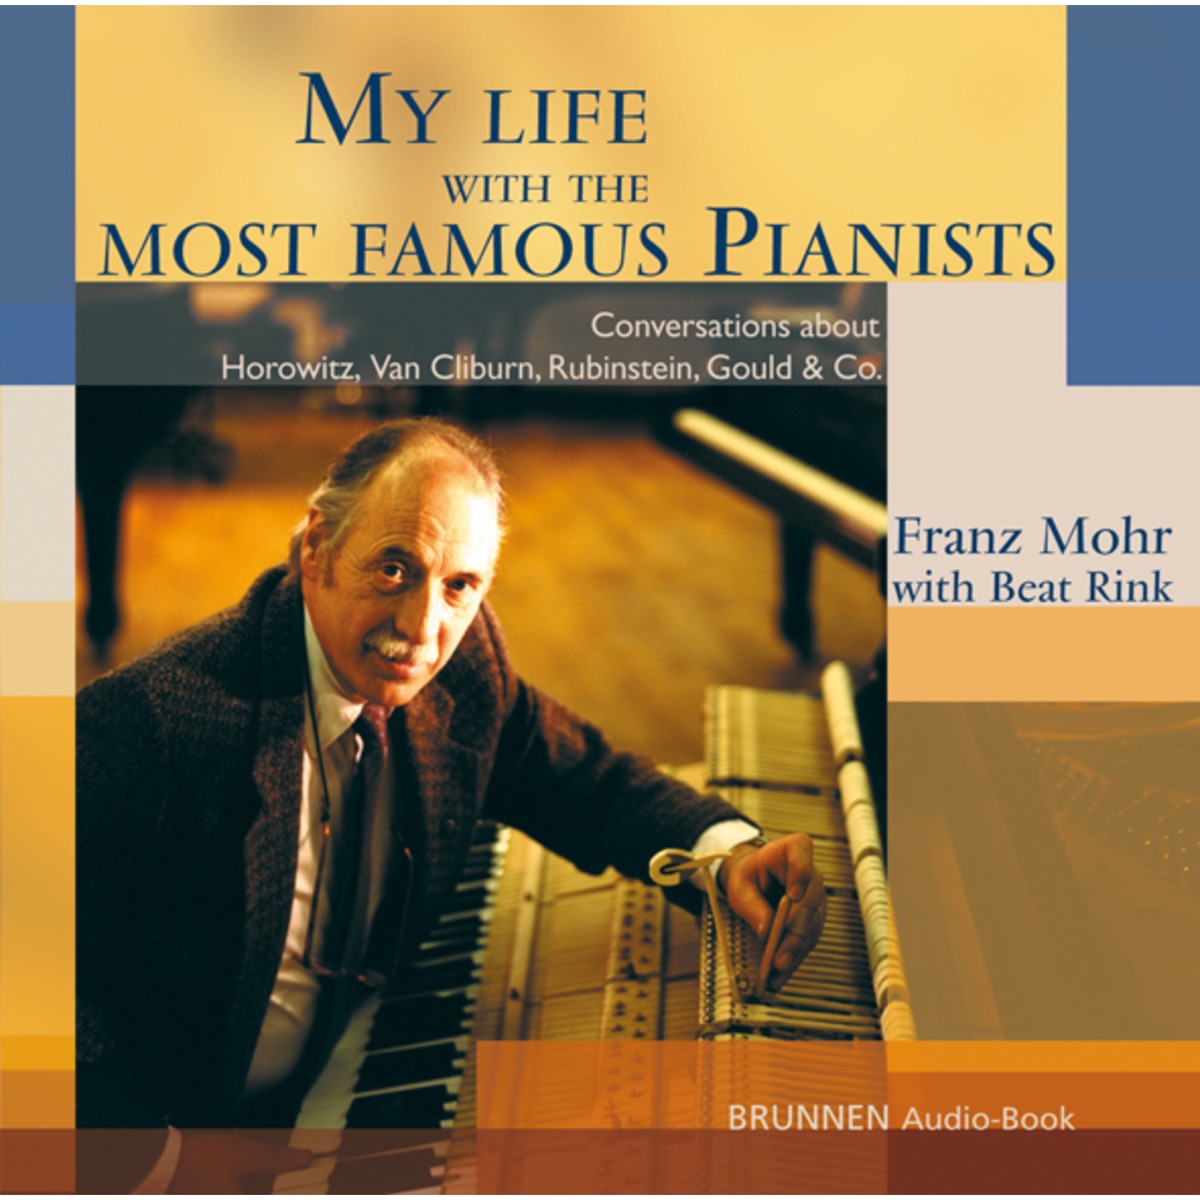 Famous　My　Music　the　Life　Pianists　With　Mohrのアルバム　Apple　Most　Franz